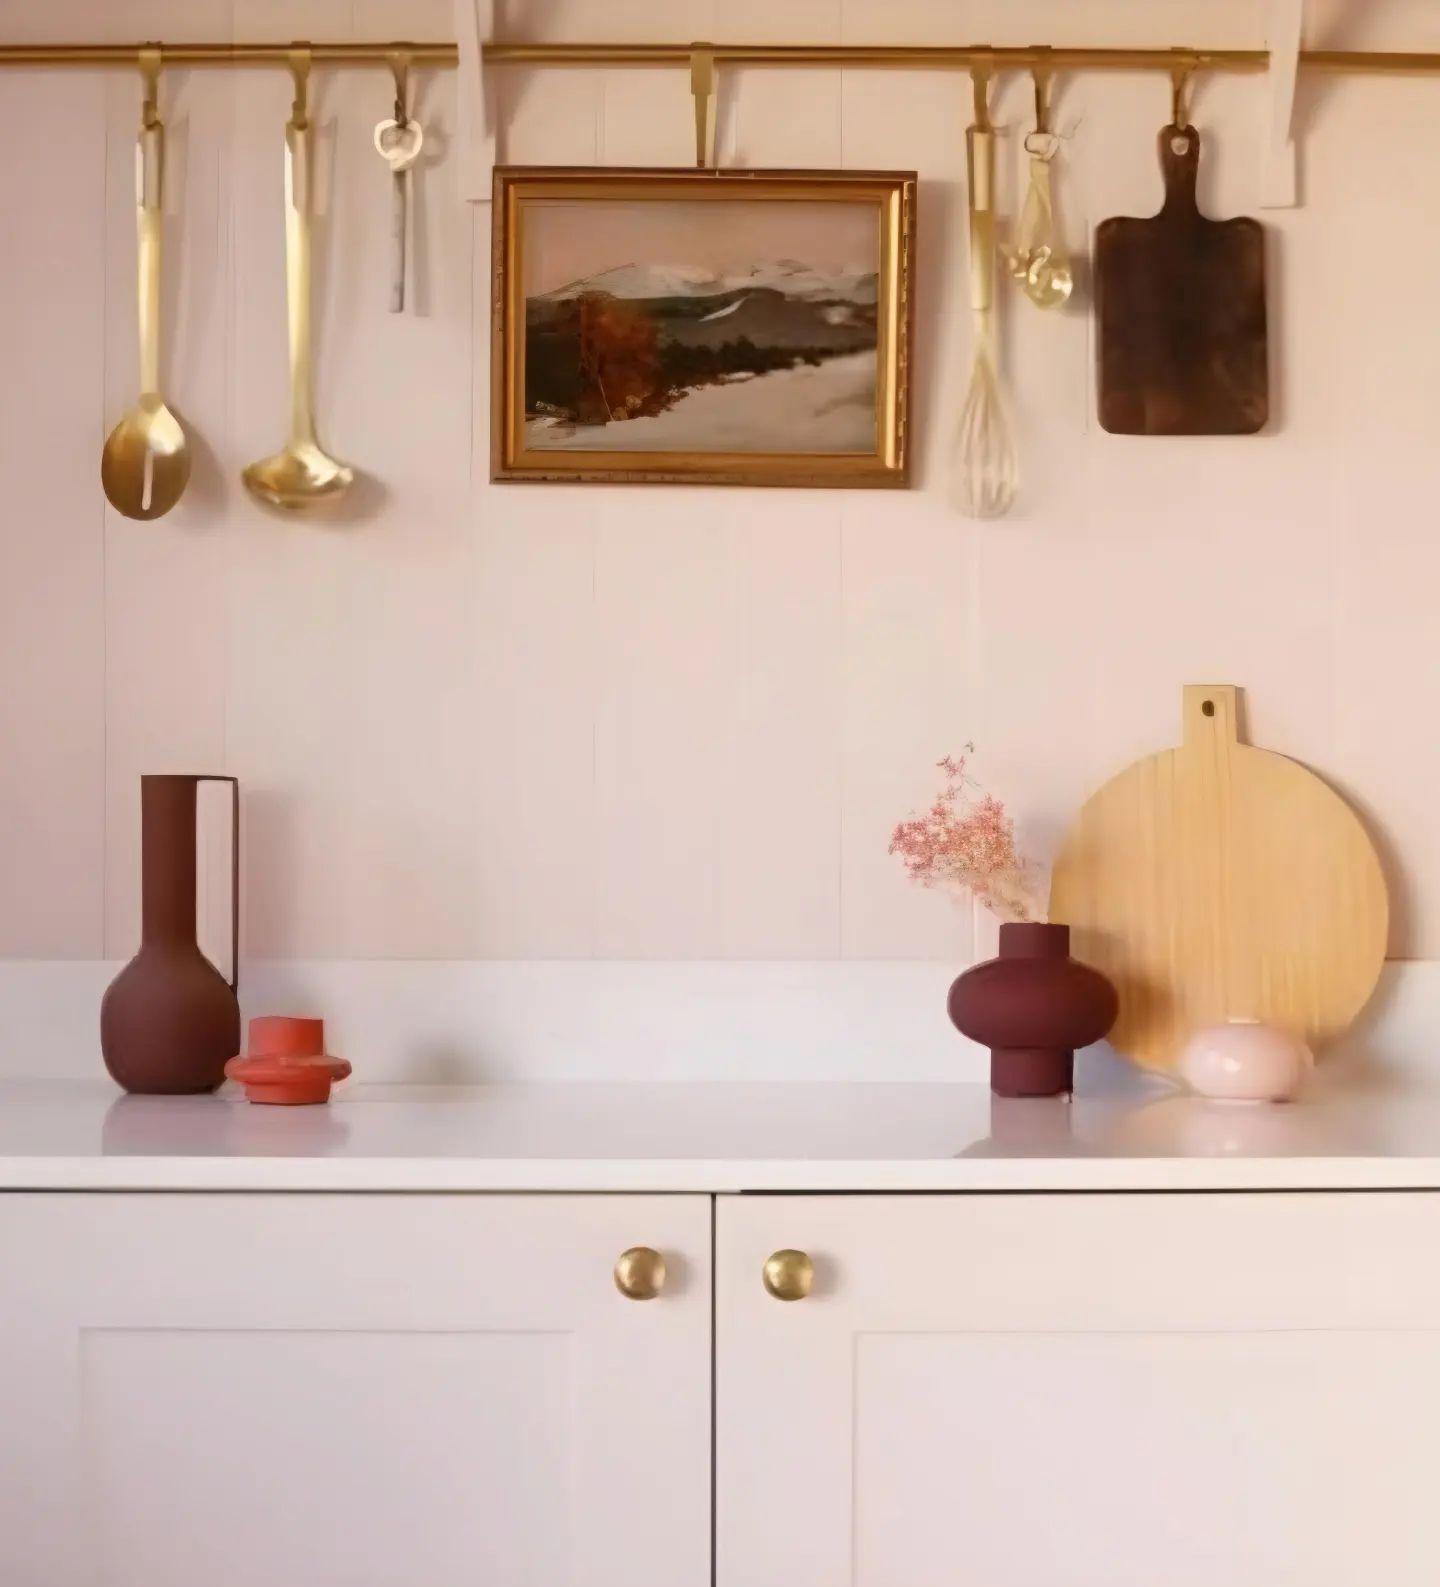 Jen @halfpaintedhouse has used 🎨 Threadneedle No.262 by Mylands of London to absolutely beautiful effect in this colour drenched kitchen scheme.

Threadneedle No.262 - a refined and subtle pale pink, white with a hint of orange and umber.

The warm pastel tones of this paint are blackened slightly, resulting in a deep, sophisticated and fresh colour. It can feel delicate in large spaces, or be used to add an enveloping pink tone to smaller rooms.

Image and design credit: @halfpaintedhouse
Paint: @mylands_london